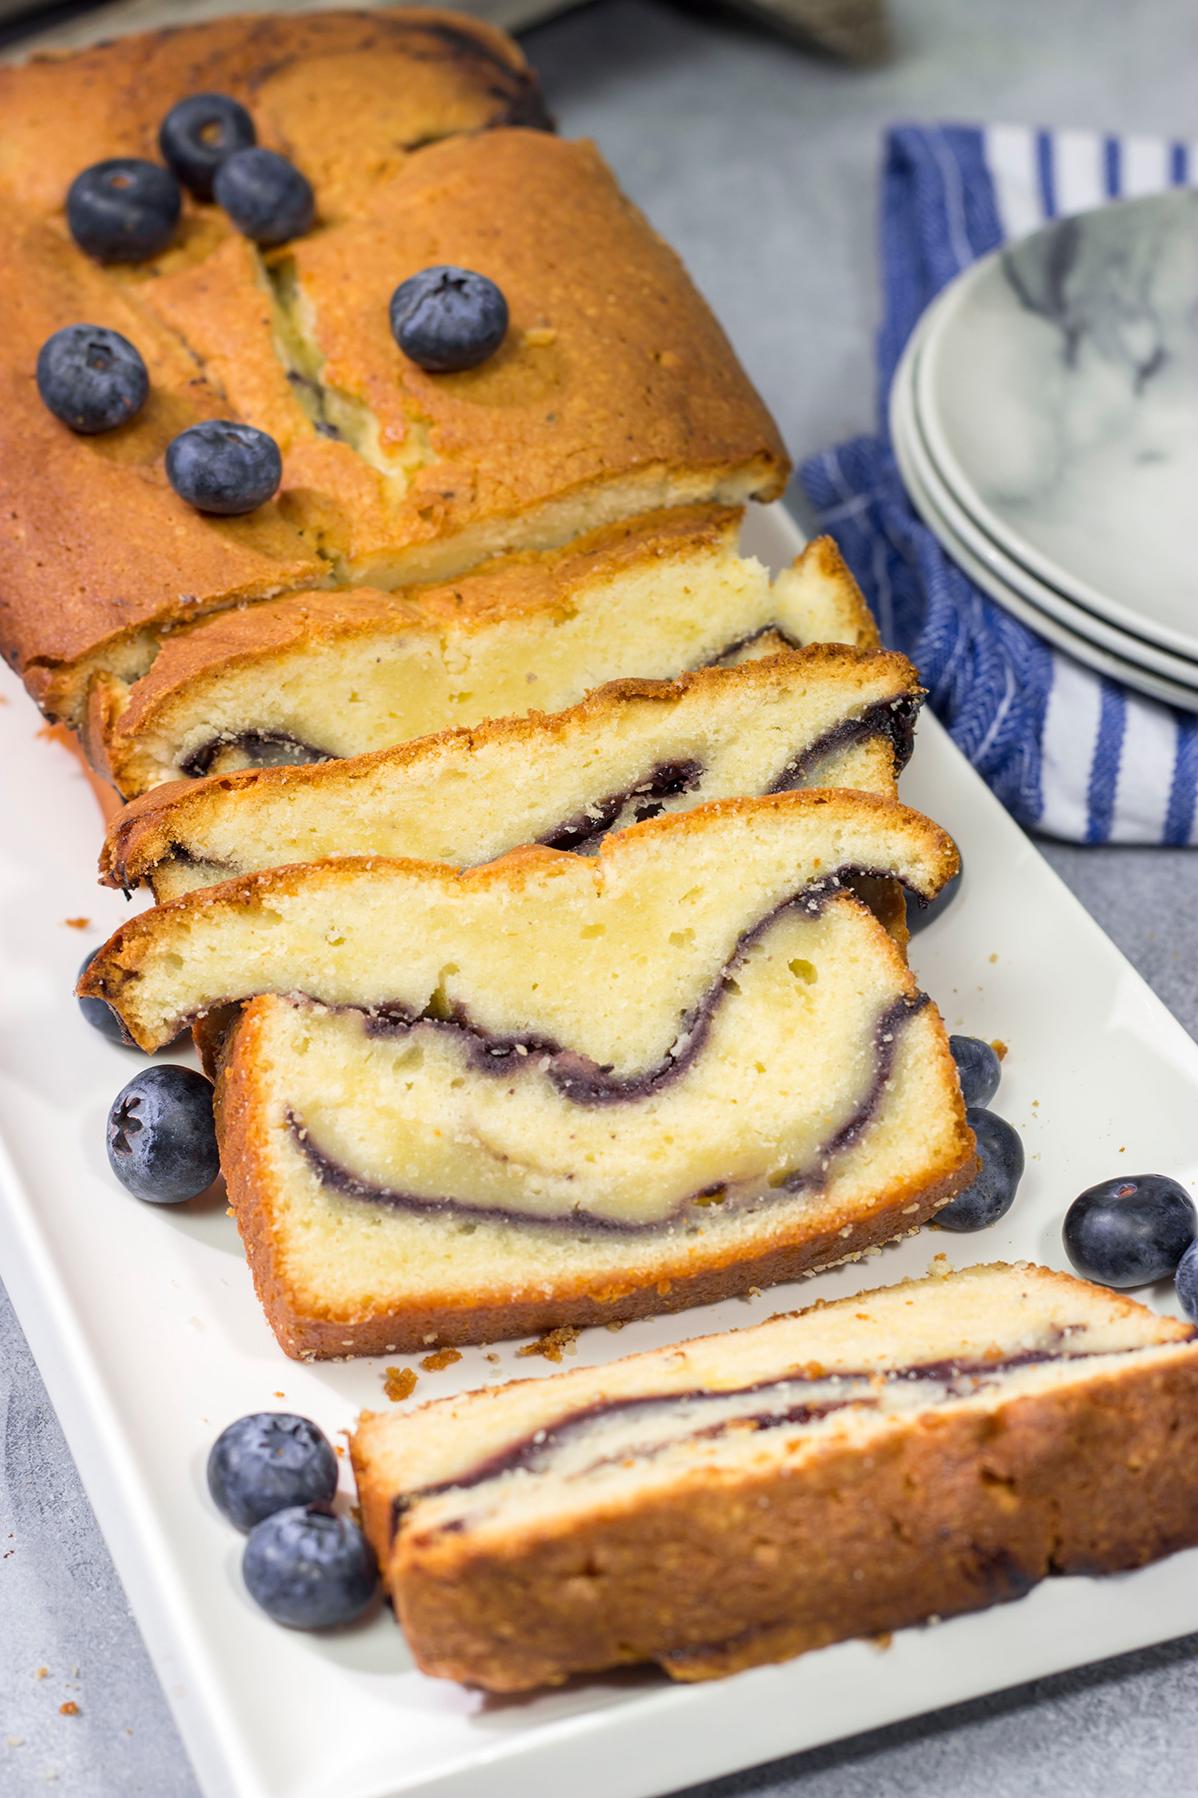  Nothing beats the smell of fresh-baked blueberry cake.